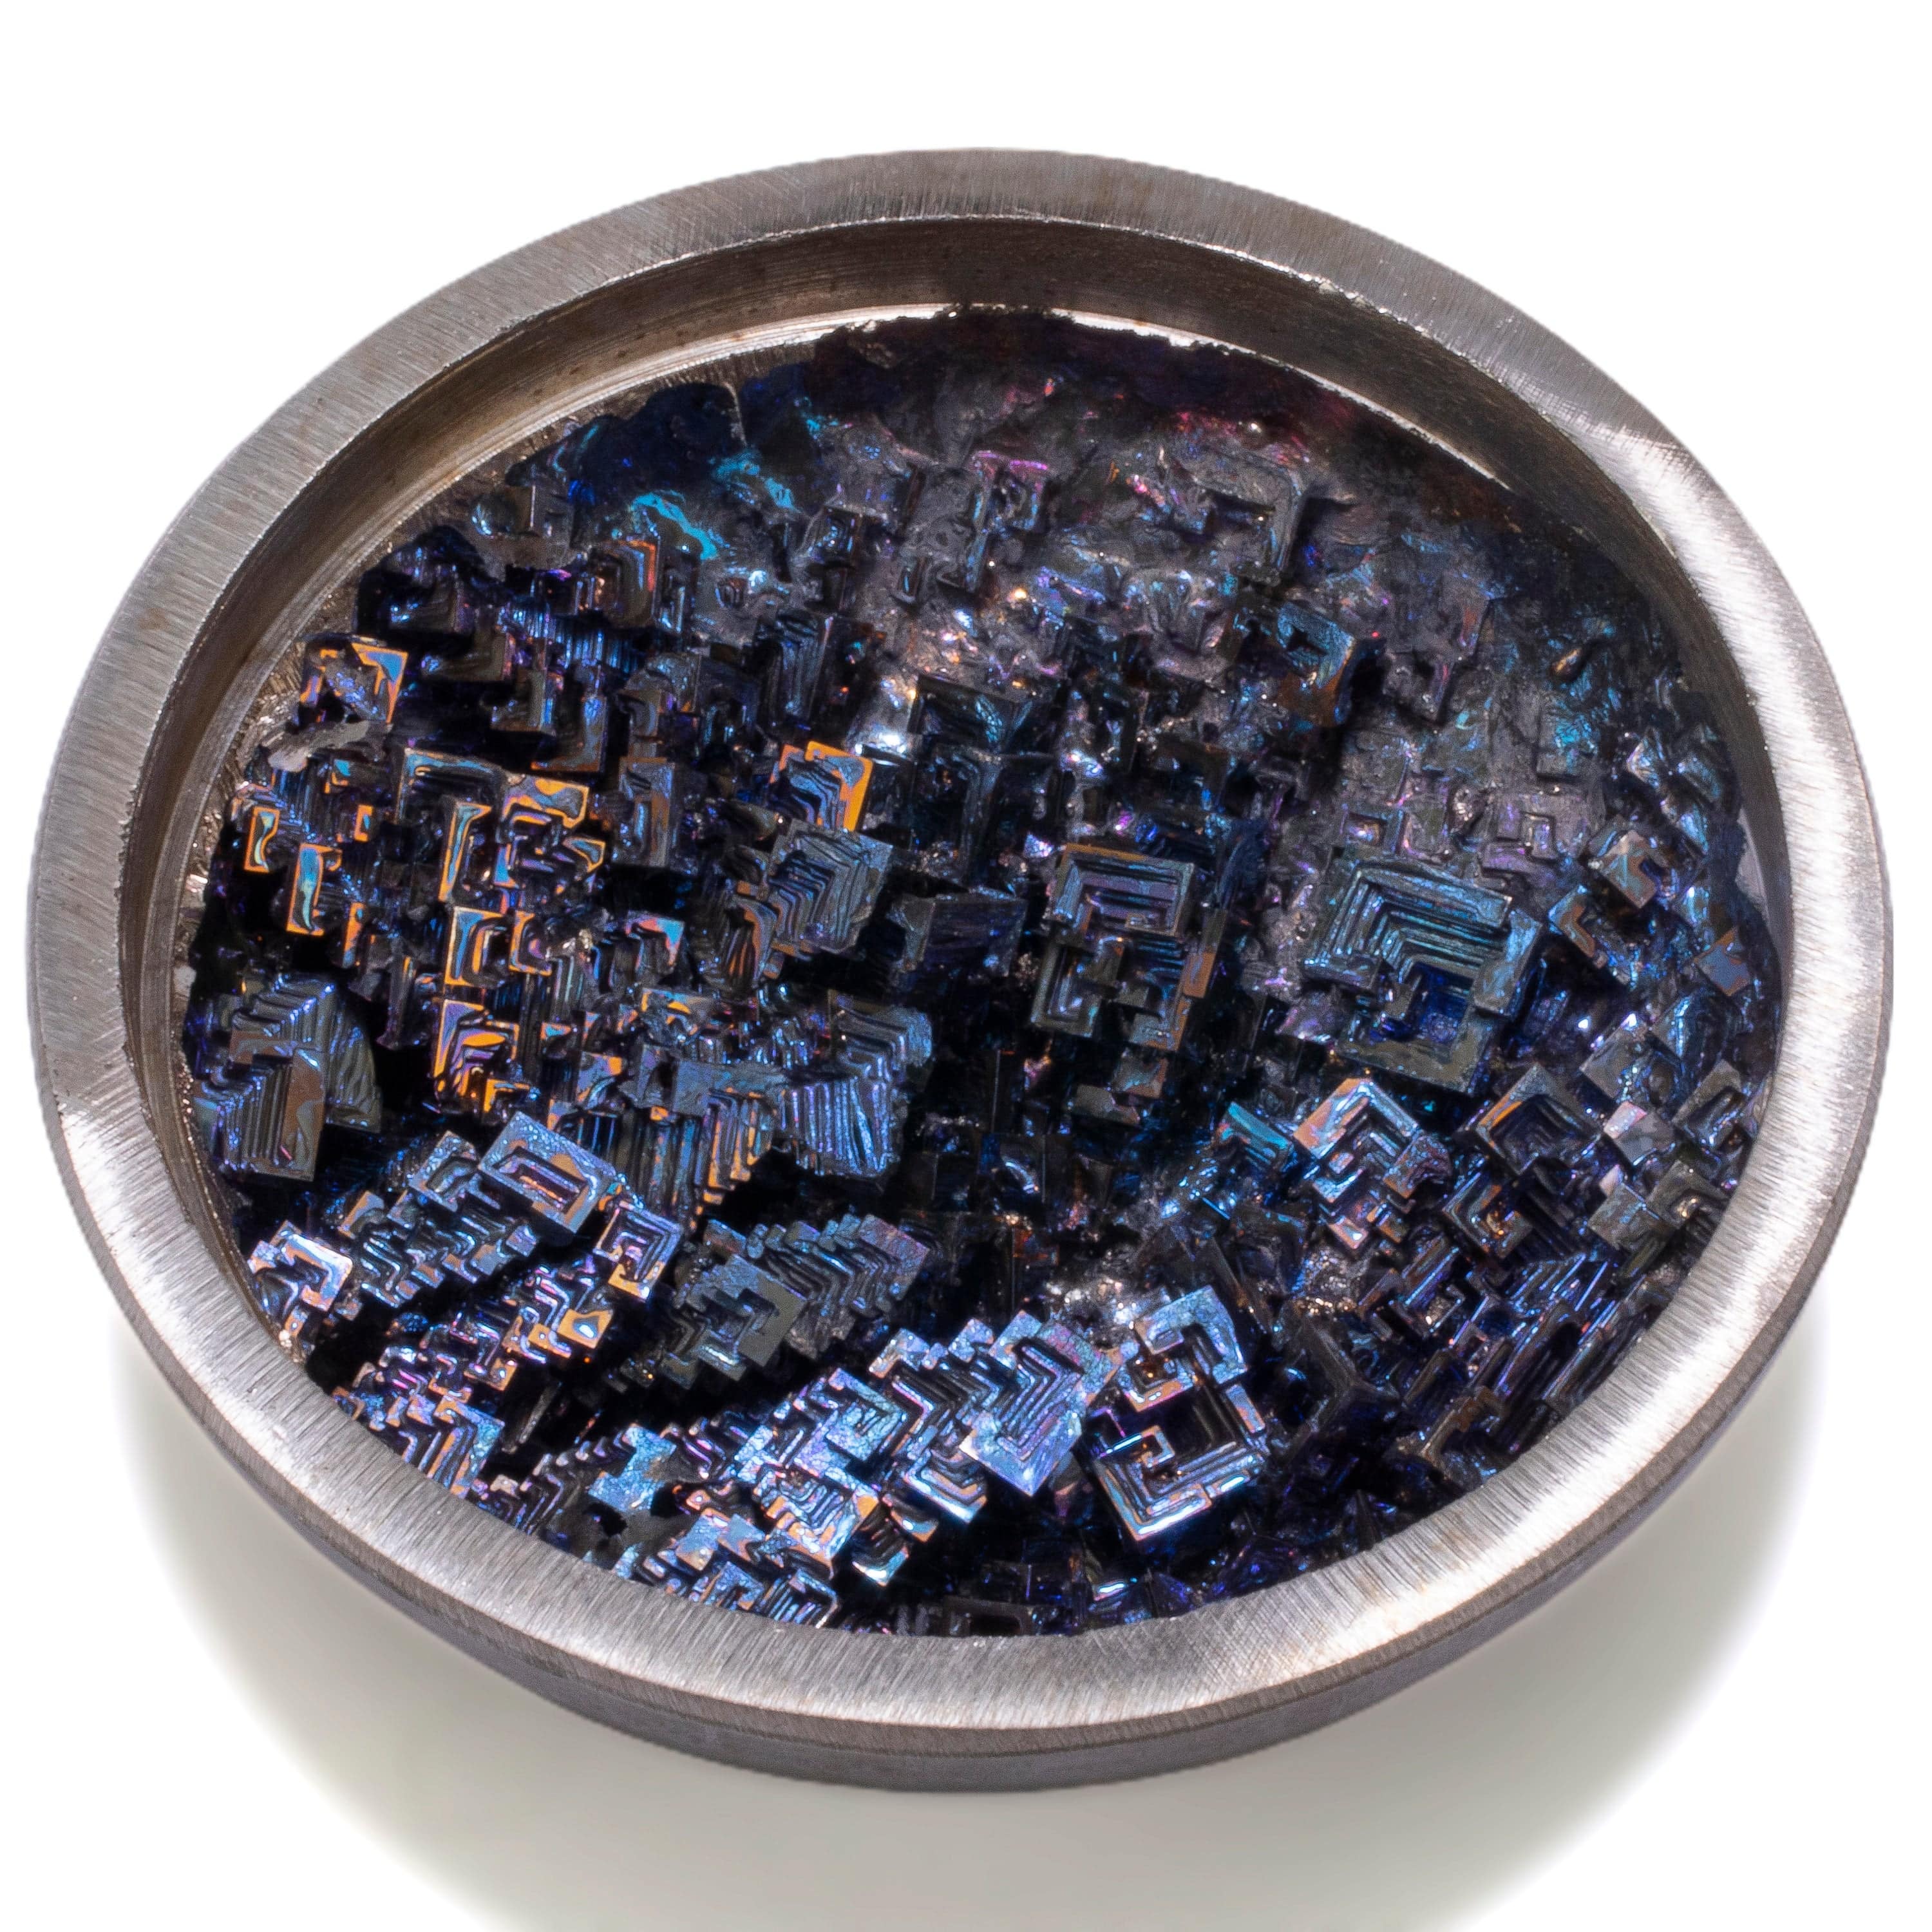 KALIFANO TUMBLED STONES Purple Bismuth Ore Bowl - 4" BISMUTH-B-PP